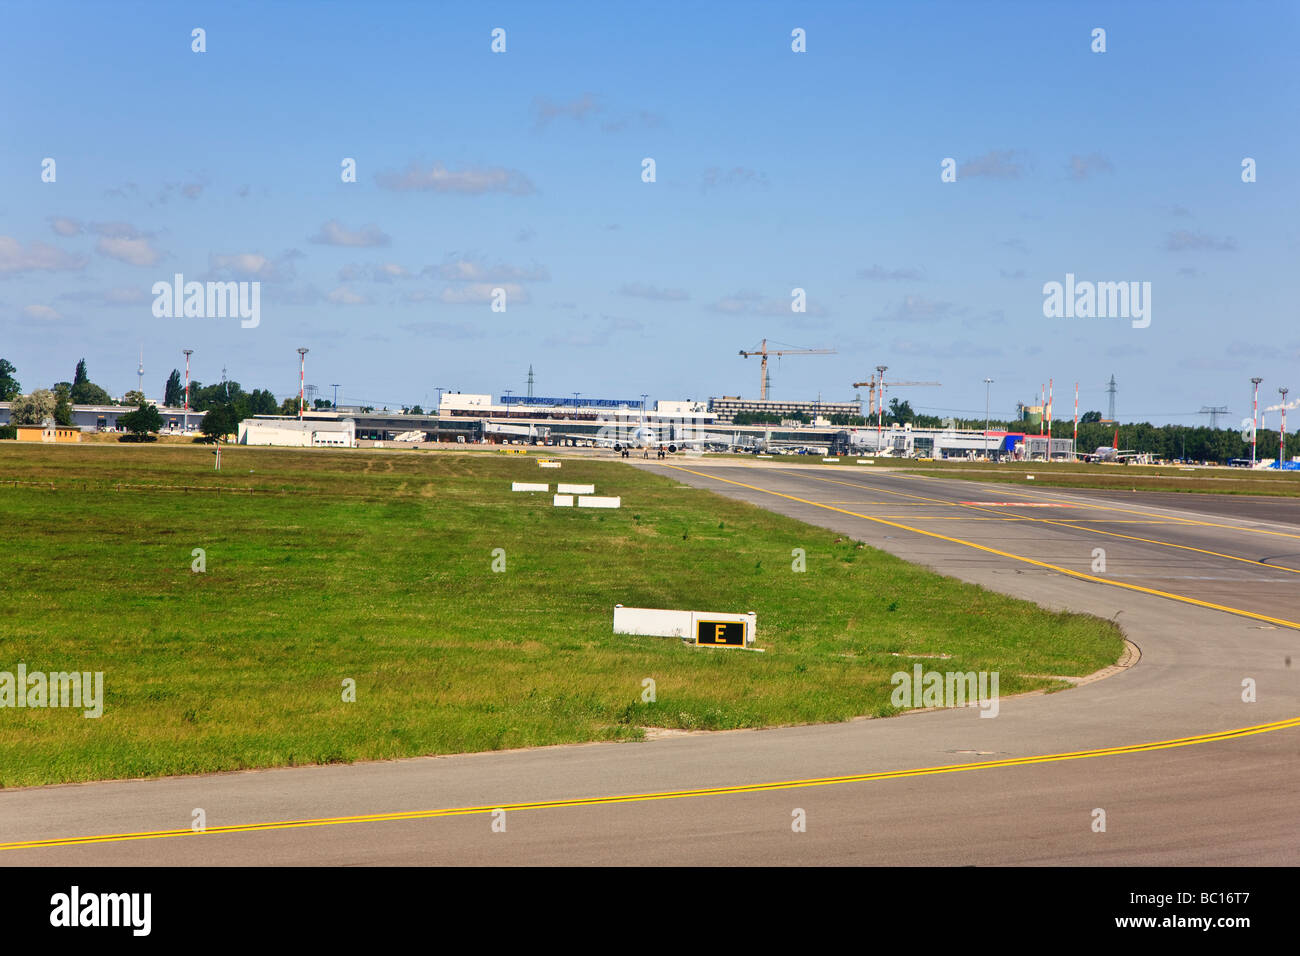 View of the runway and main building of the Schönefeld Airport in Berlin Germany Stock Photo